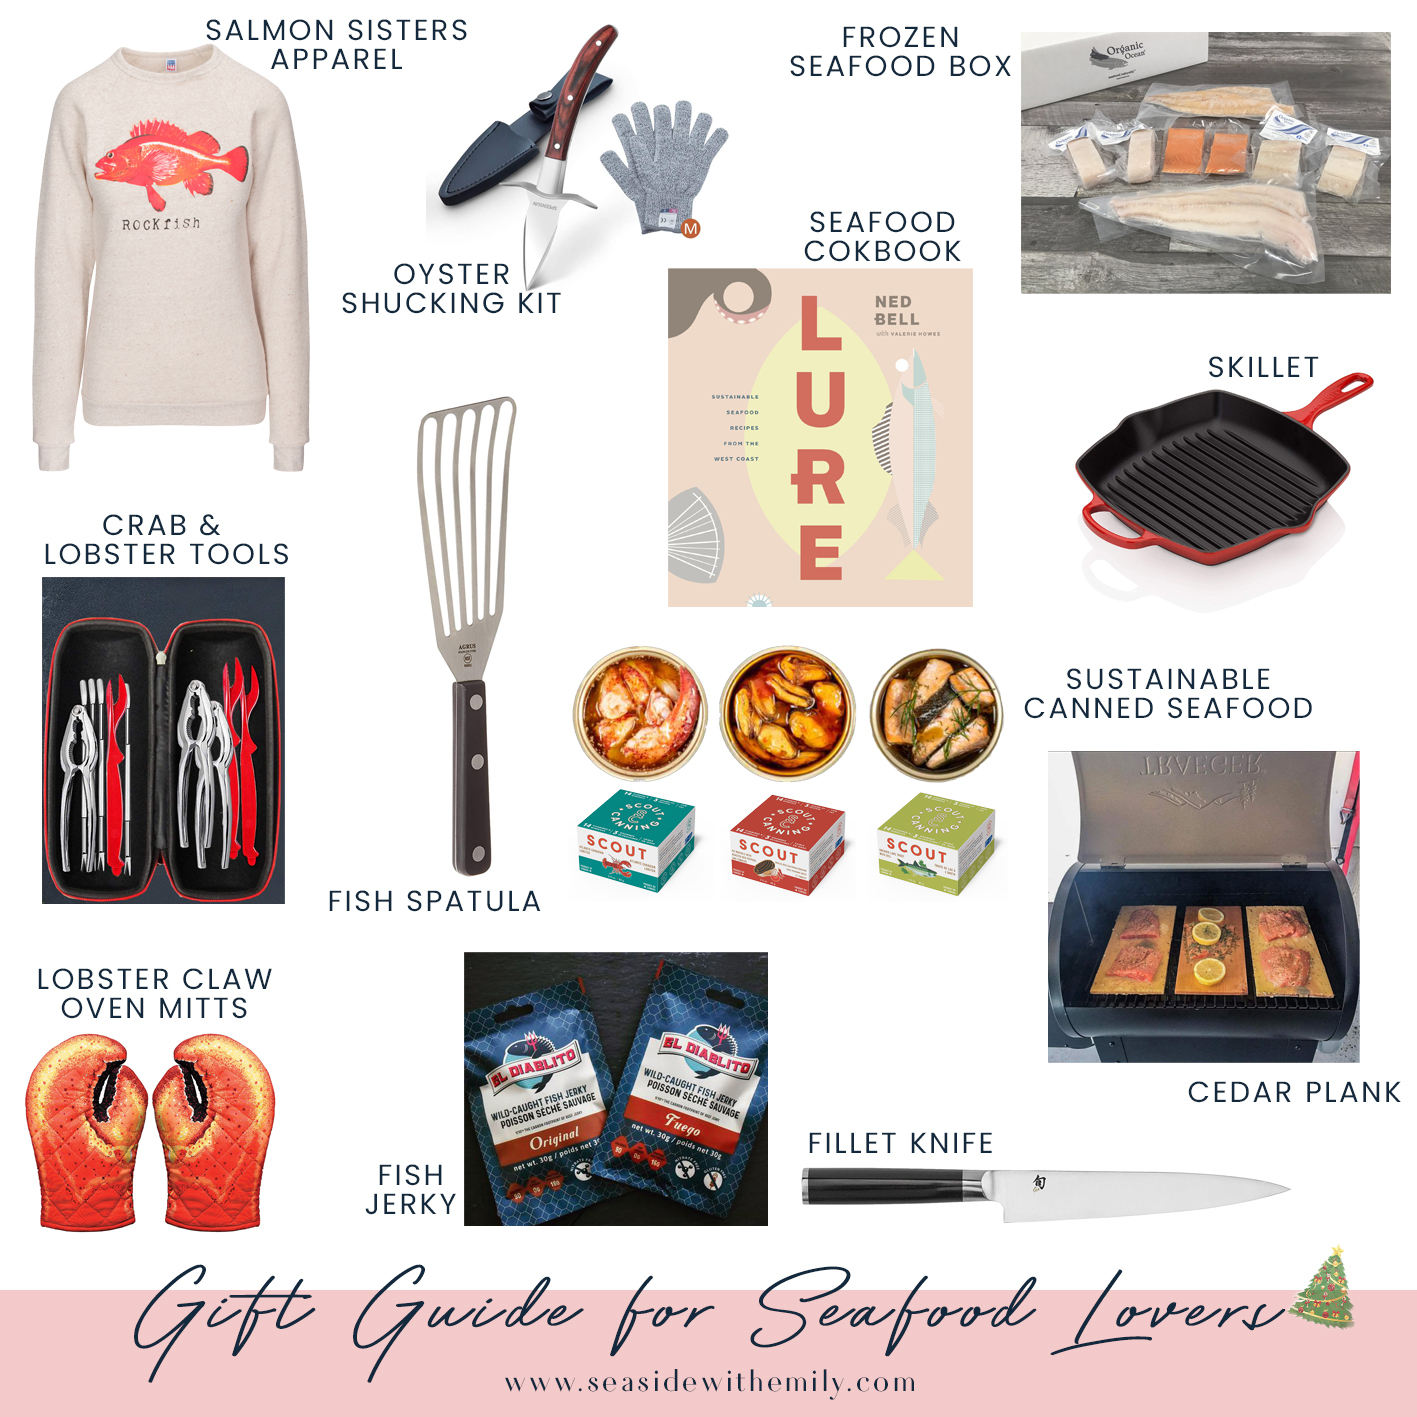 https://seasidewithemily.com/wp-content/uploads/2020/11/GiftGuide_Seafood.jpg